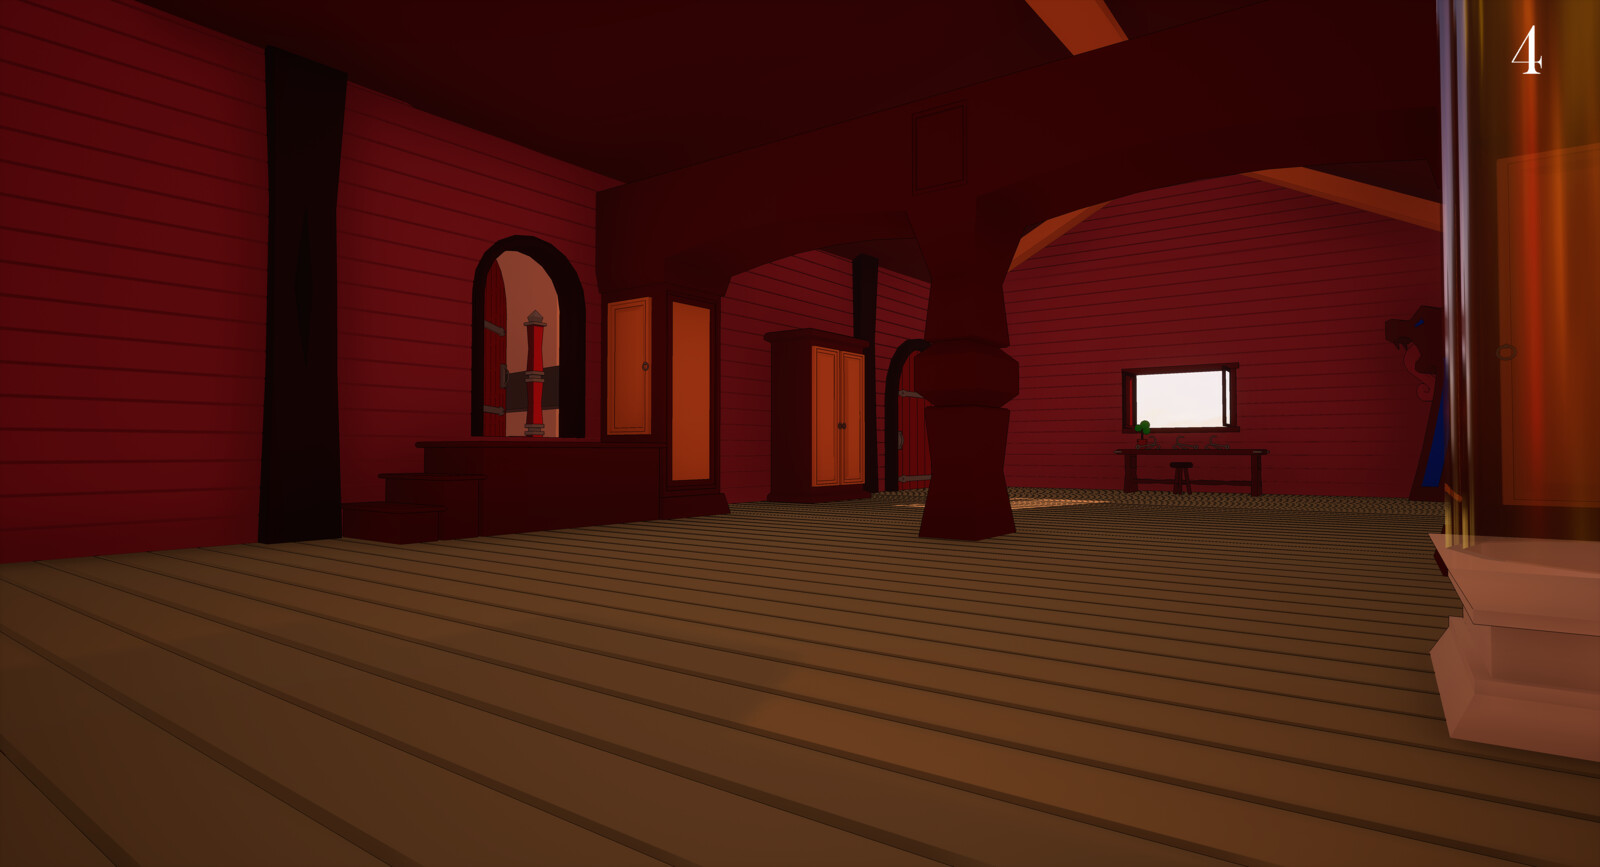 Final render of the final part. The player arrives inside the house to get to the door.